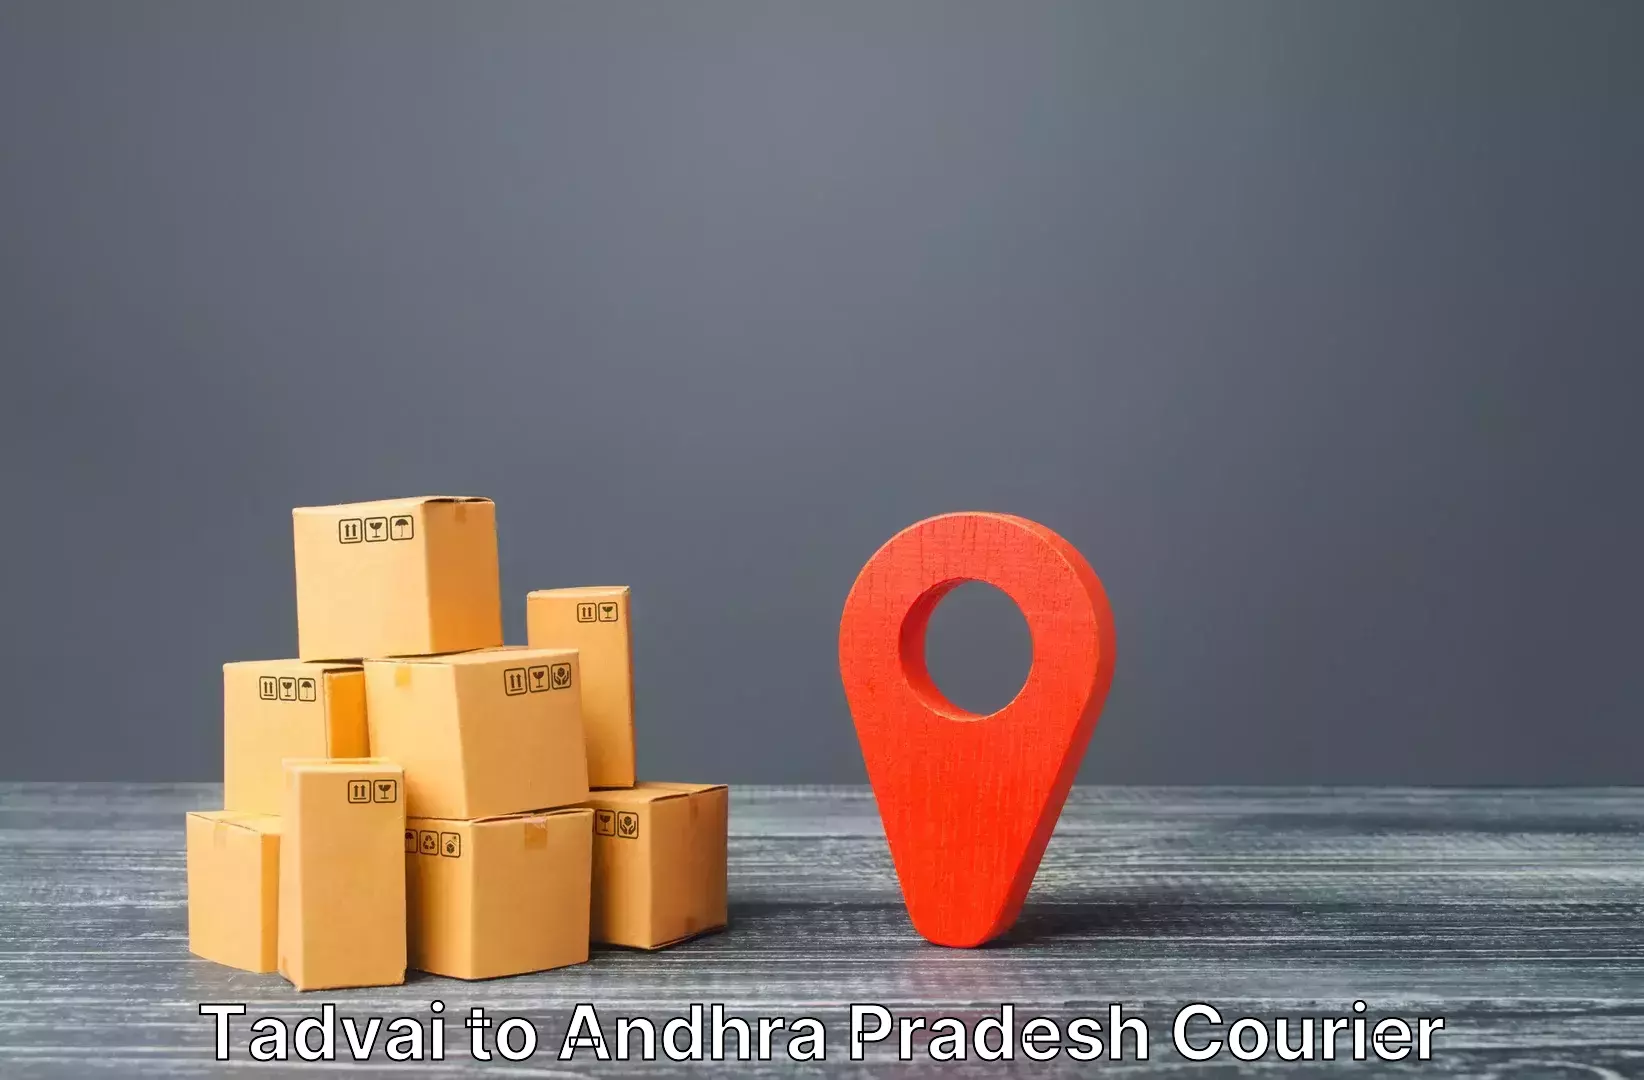 Luggage delivery network Tadvai to Andhra Pradesh